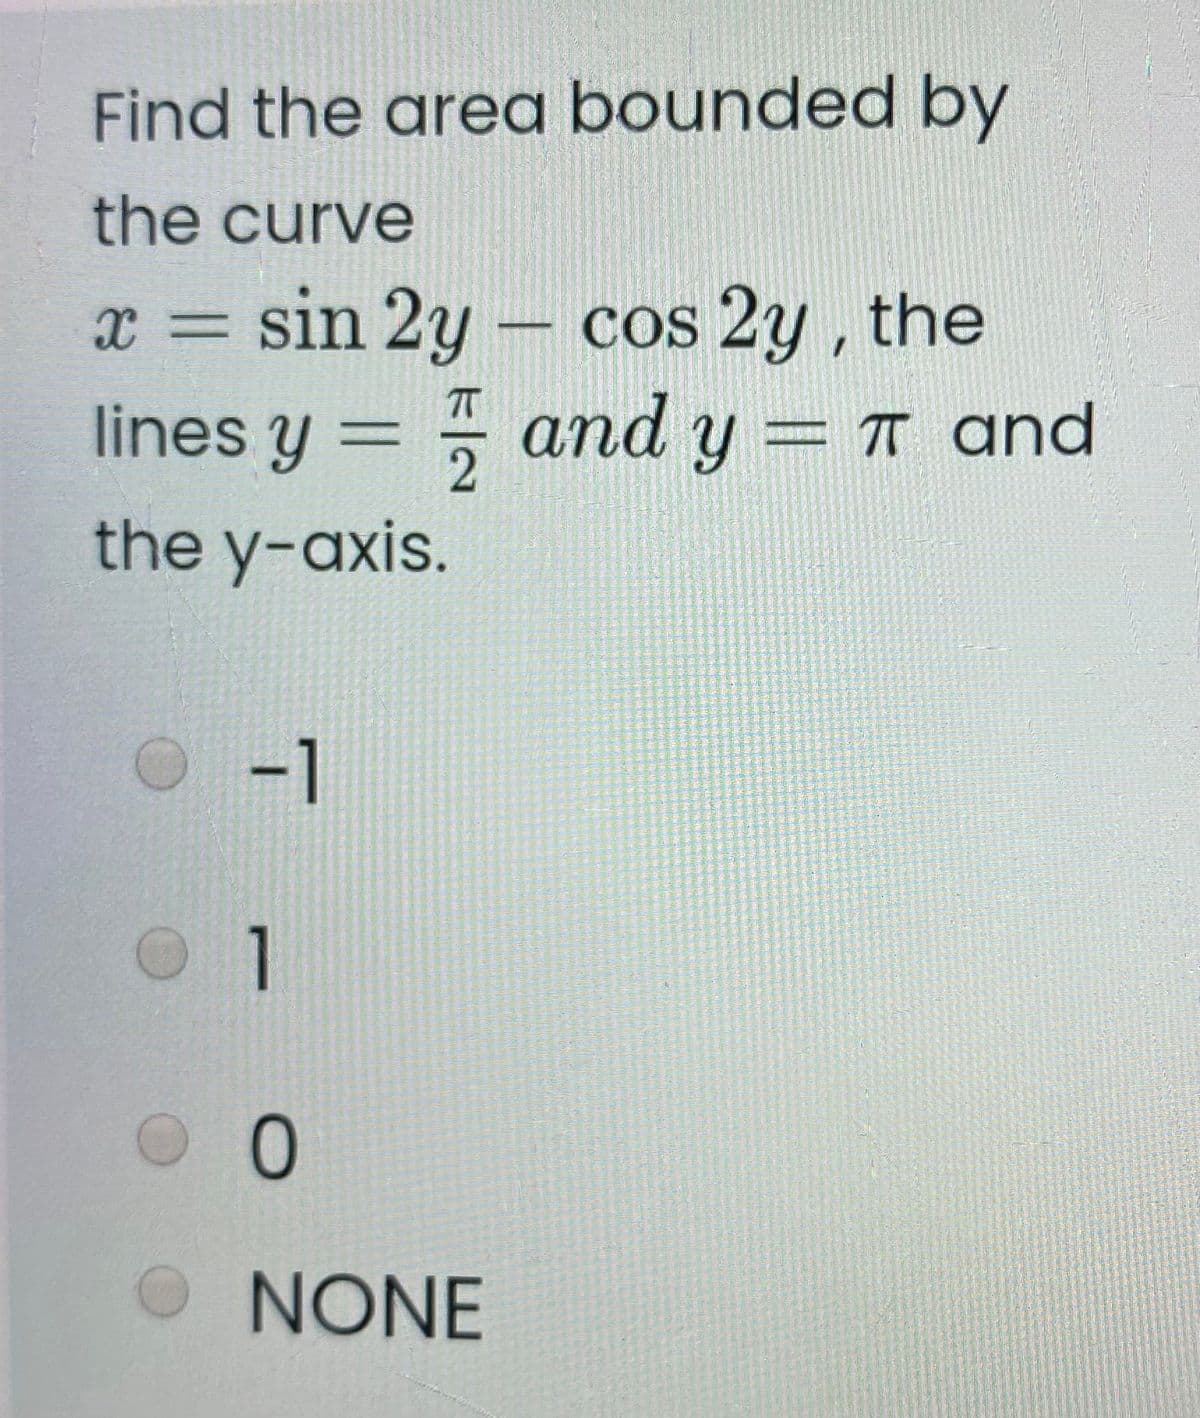 Find the area bounded by
the curve
sin 2y - cos 2y , the
lines y = and y = T and
the y-axis.
-1
NONE
